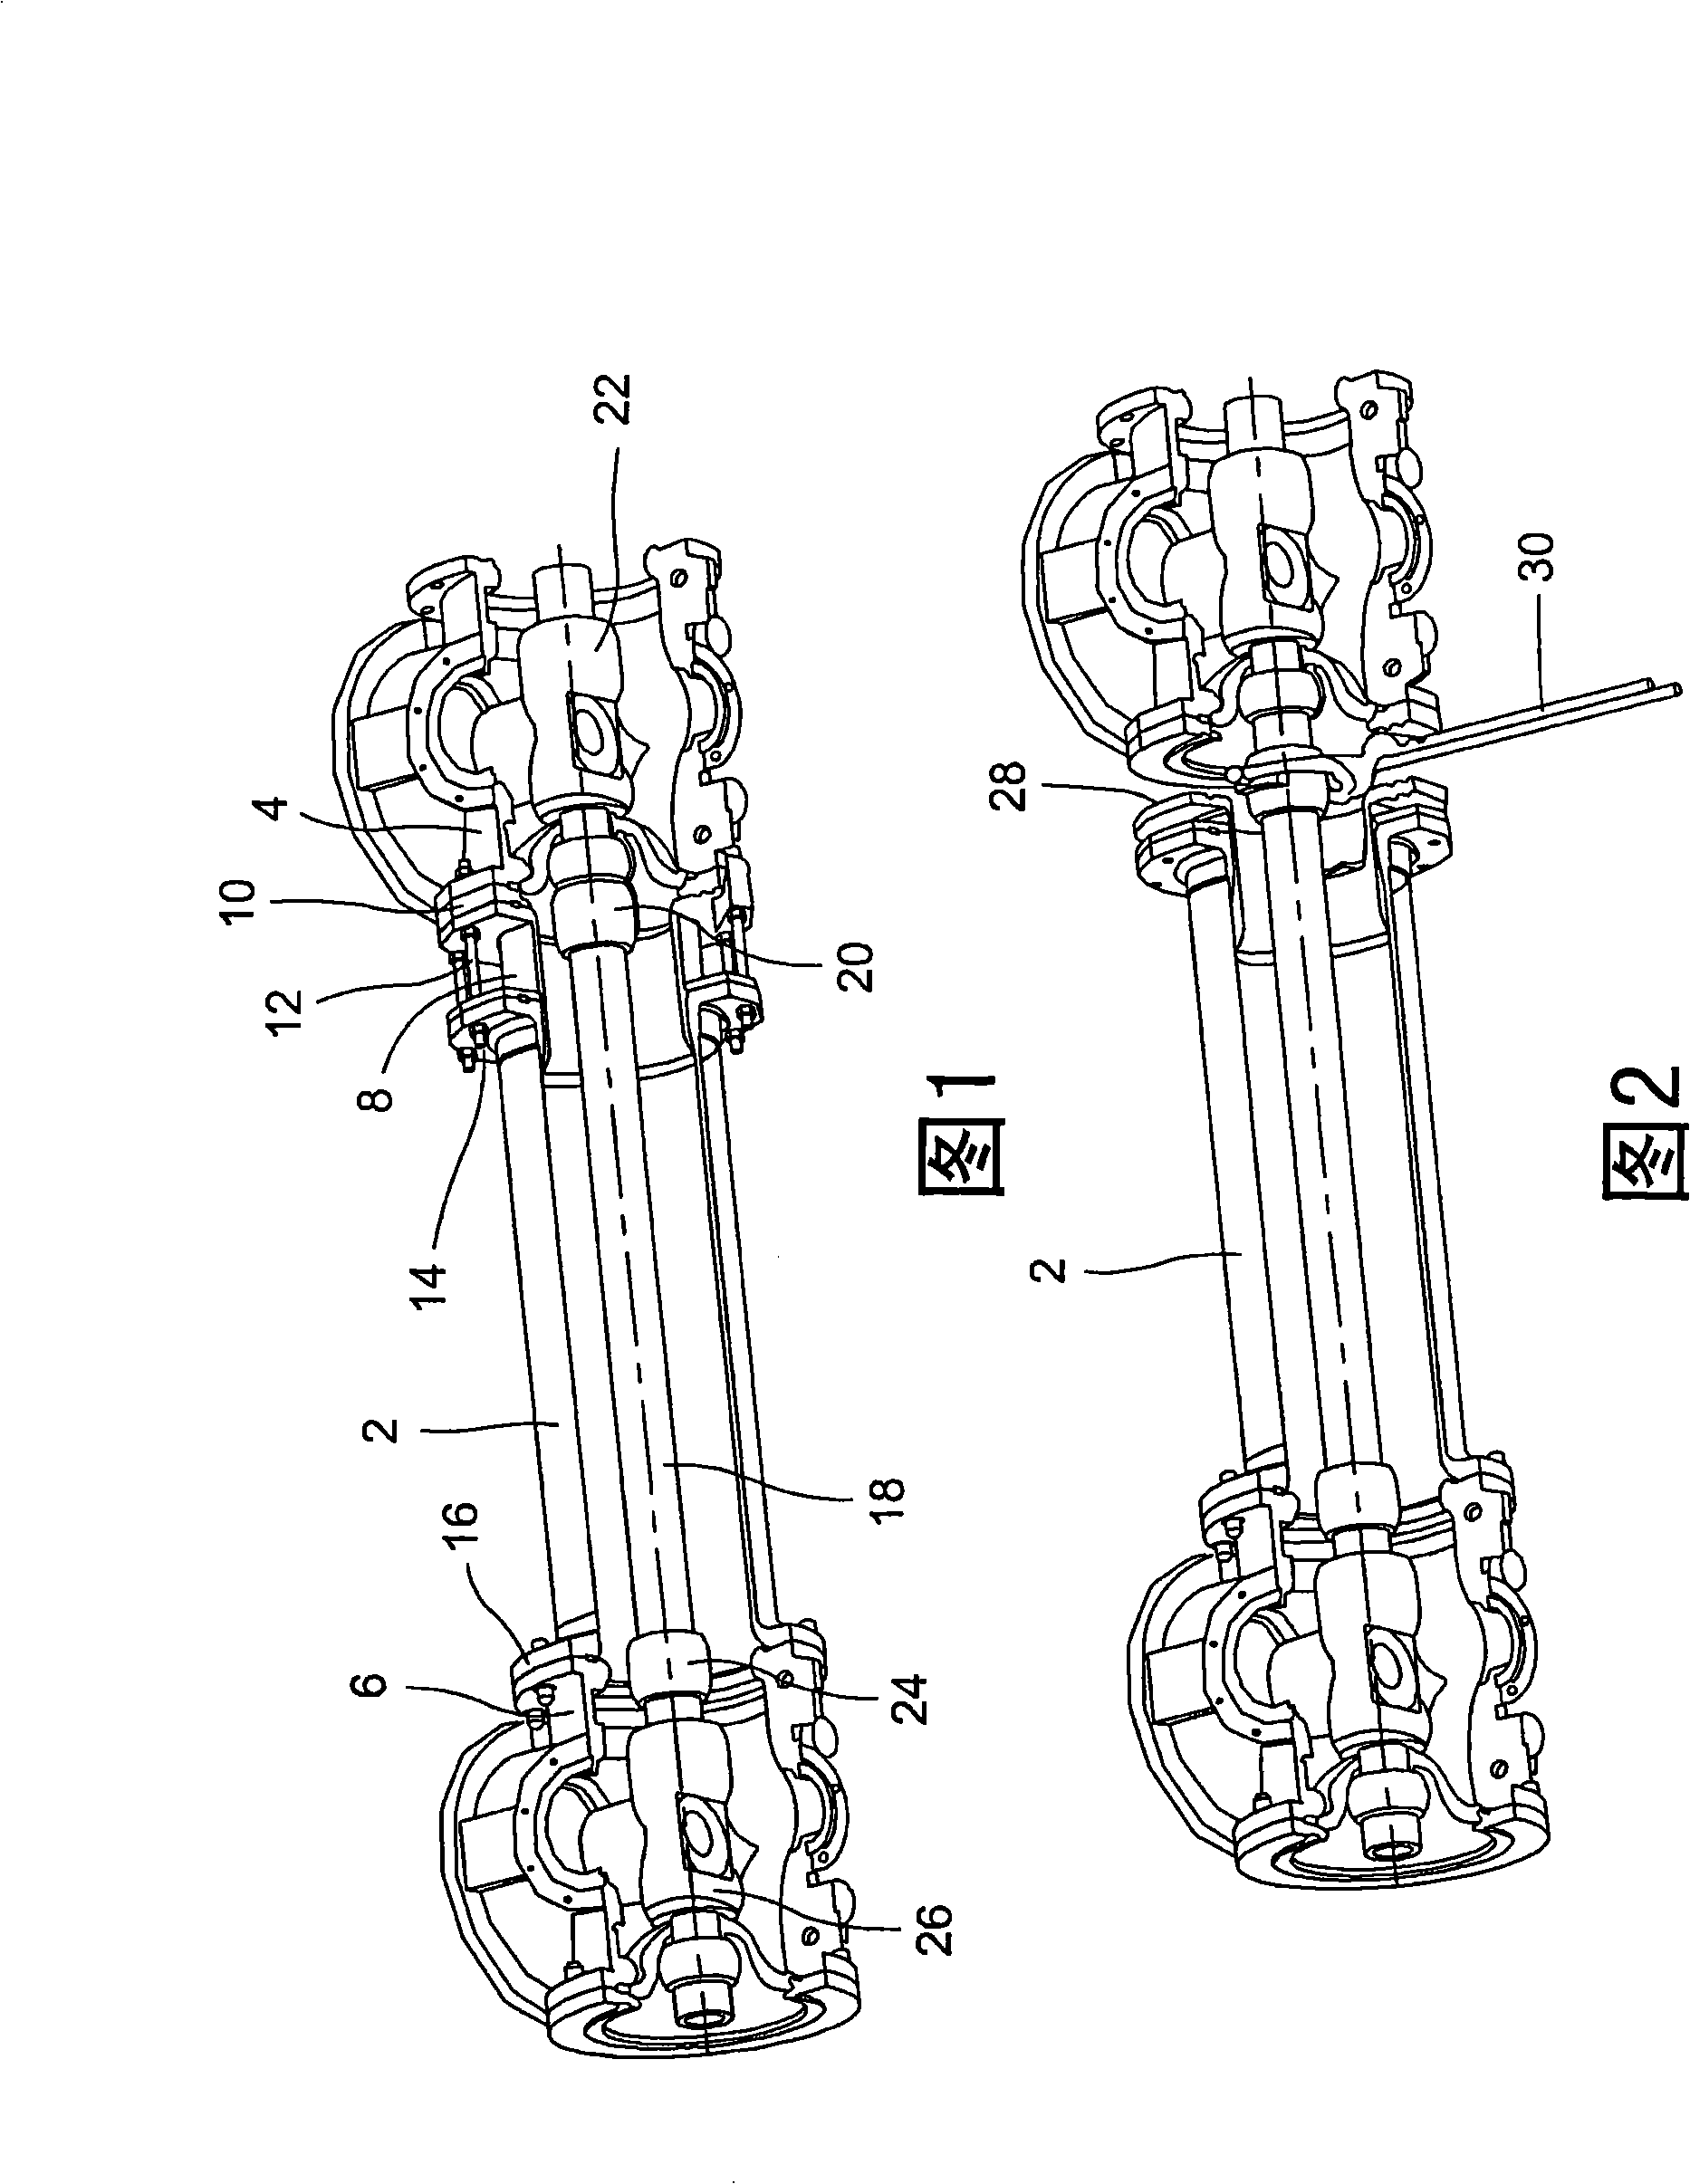 Installation of devices in a metal enclosure comprising two half-spacers for removal